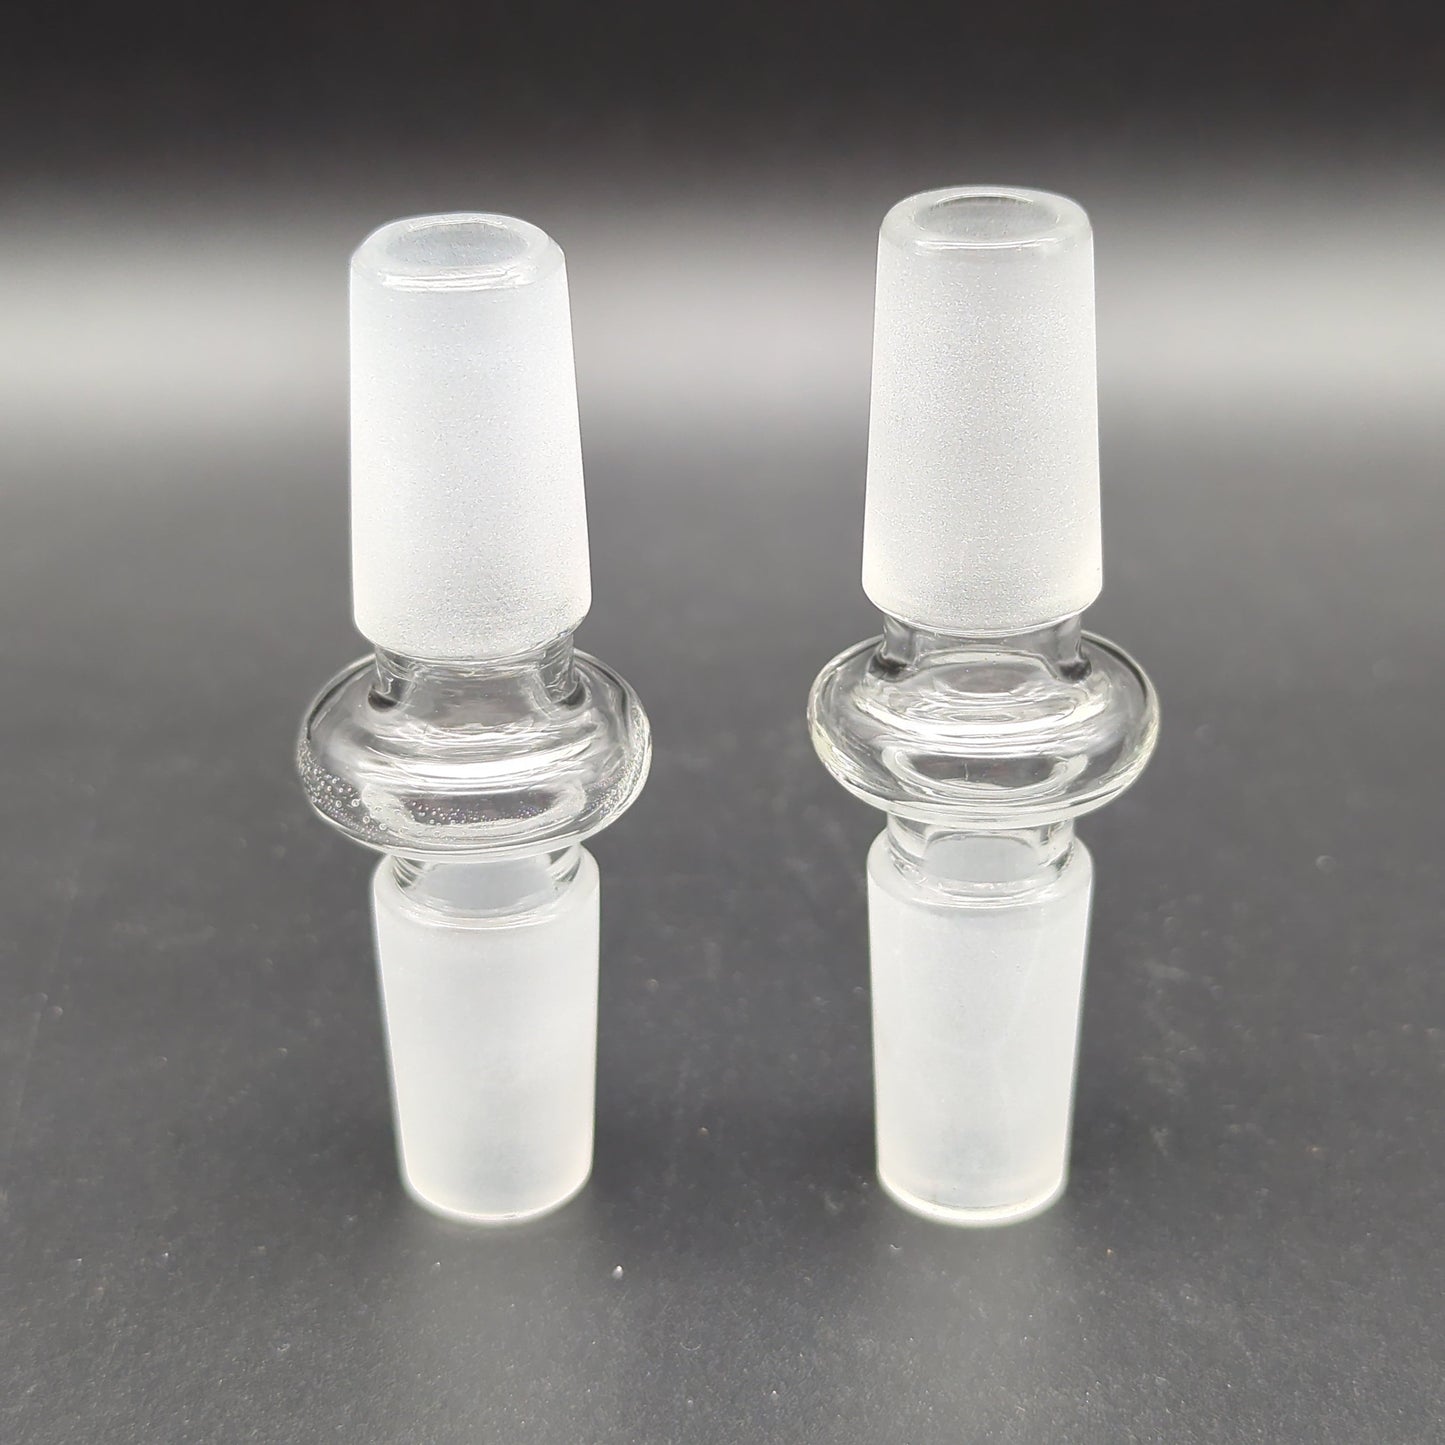 Joint Adapter - 14mm Male to 14mm Male